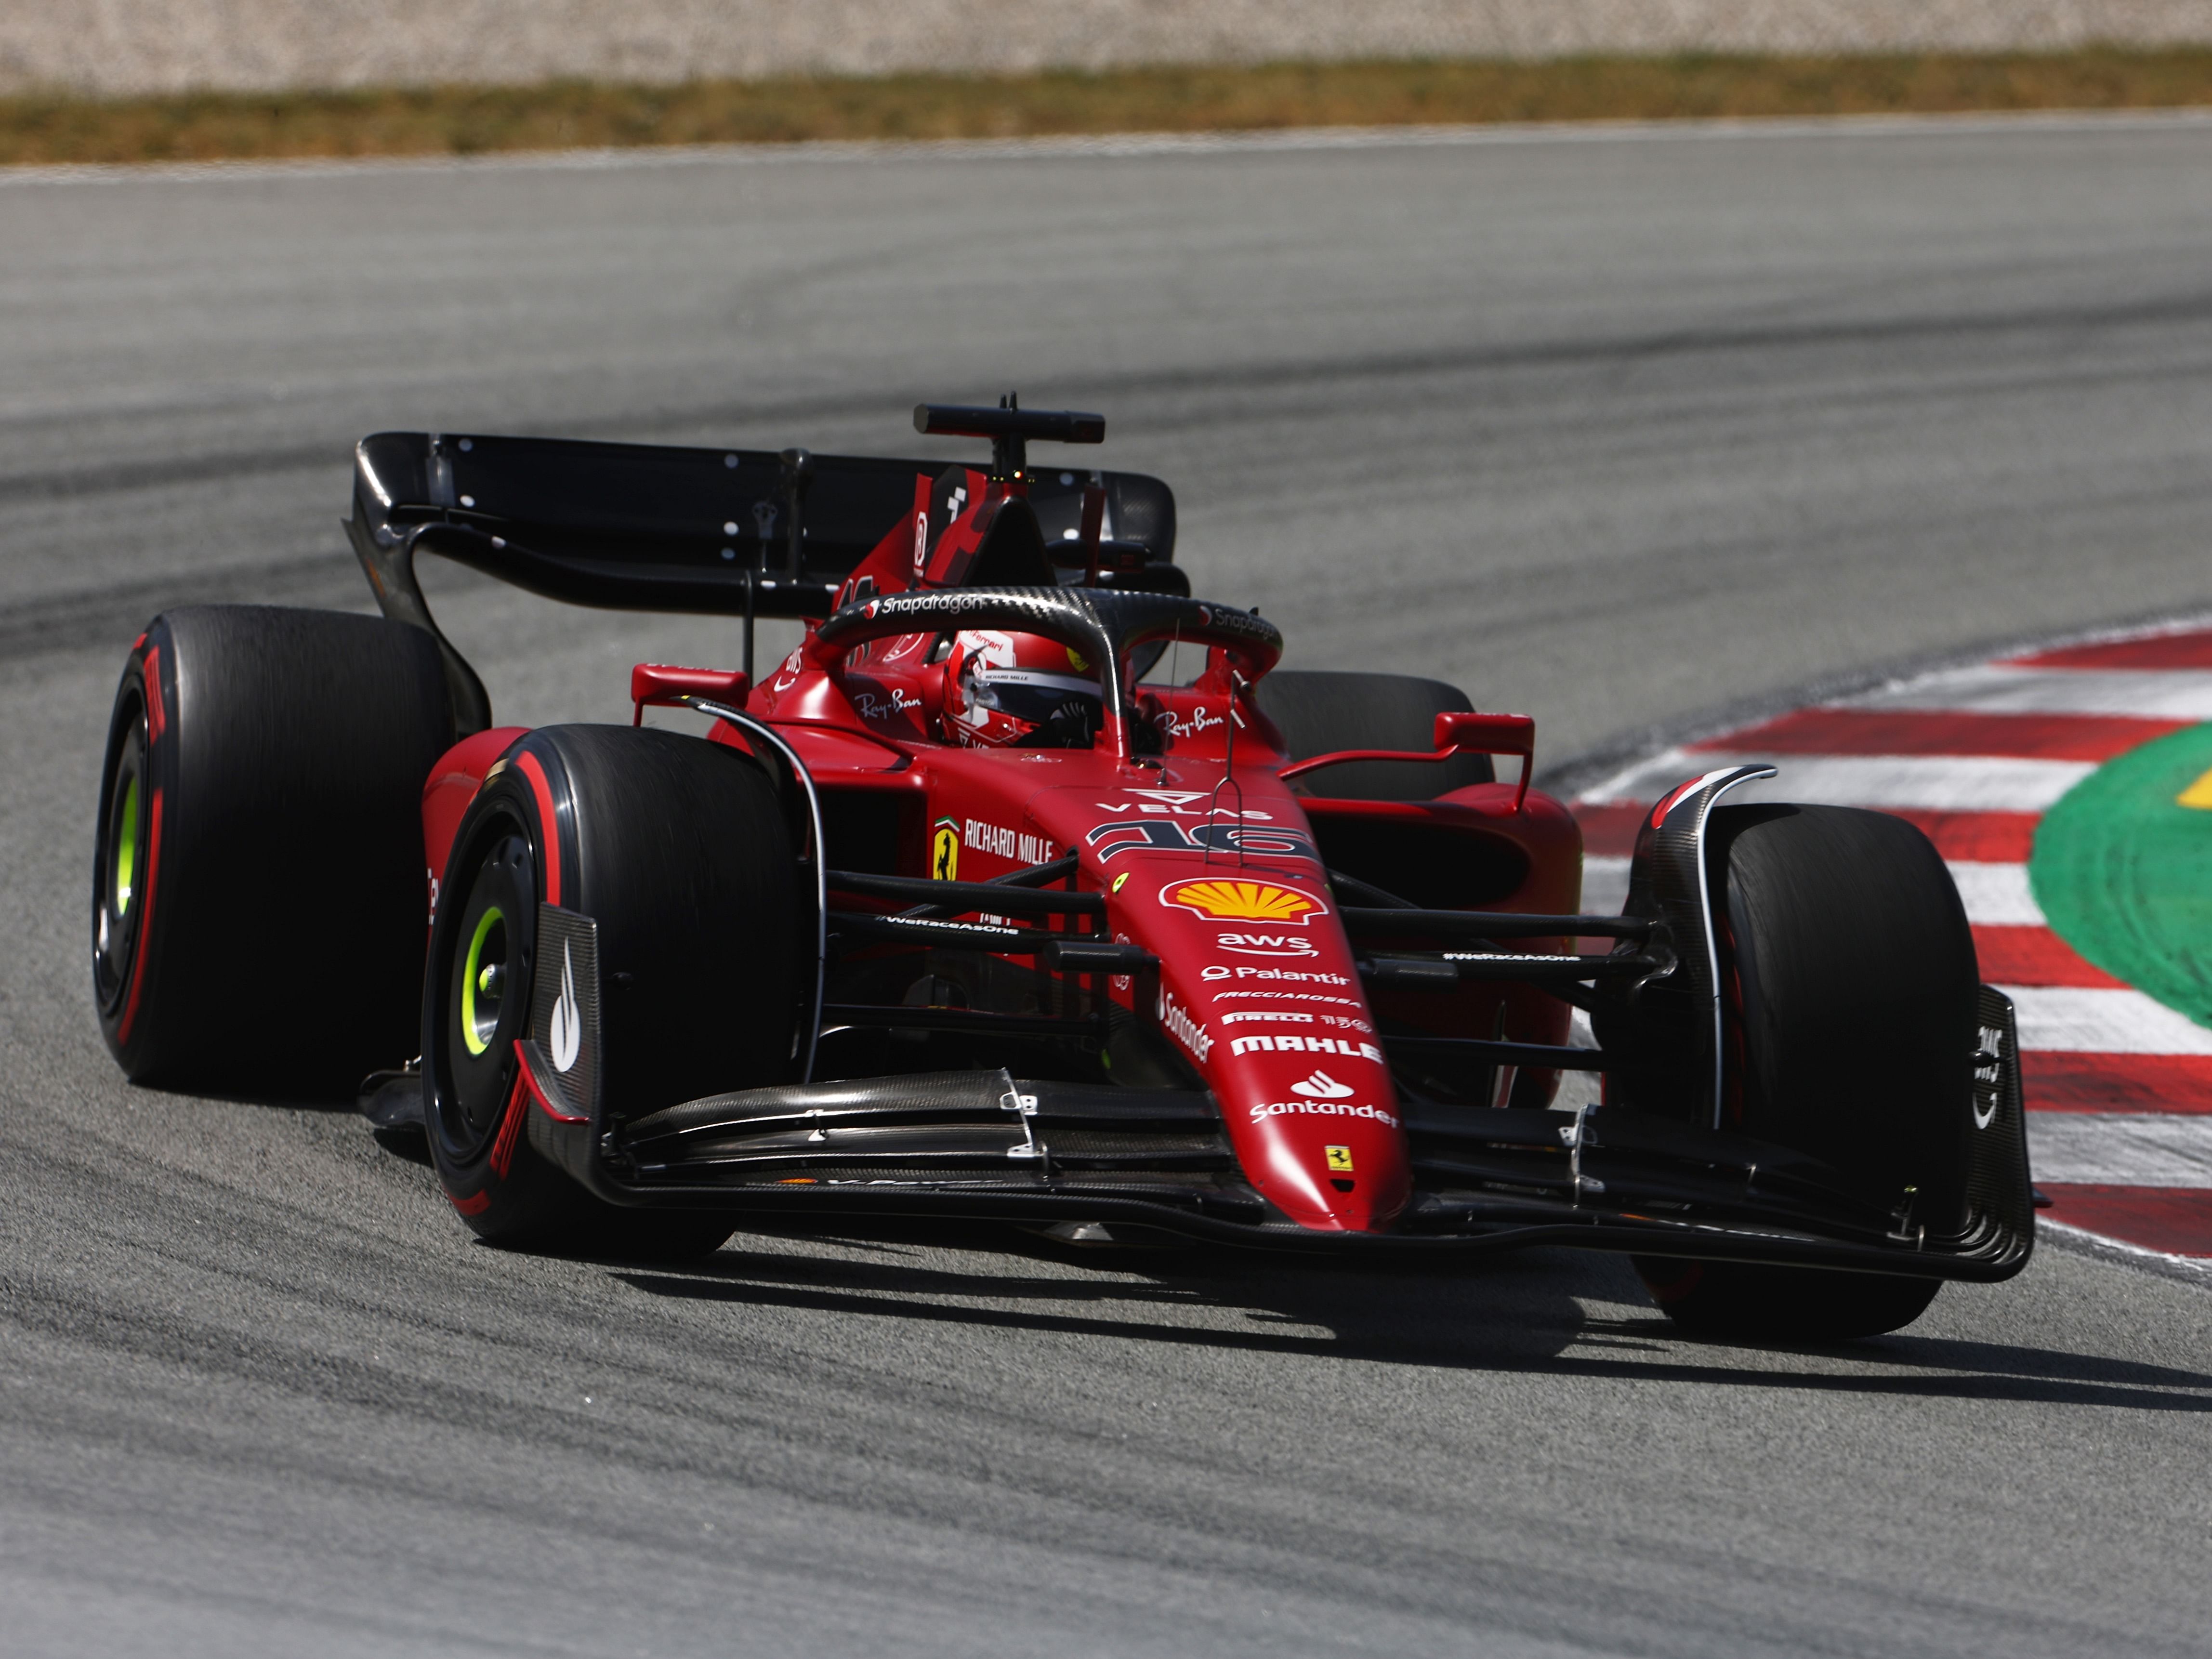 "Barcelona is the turning point" Ferrari's major upgrade will make an